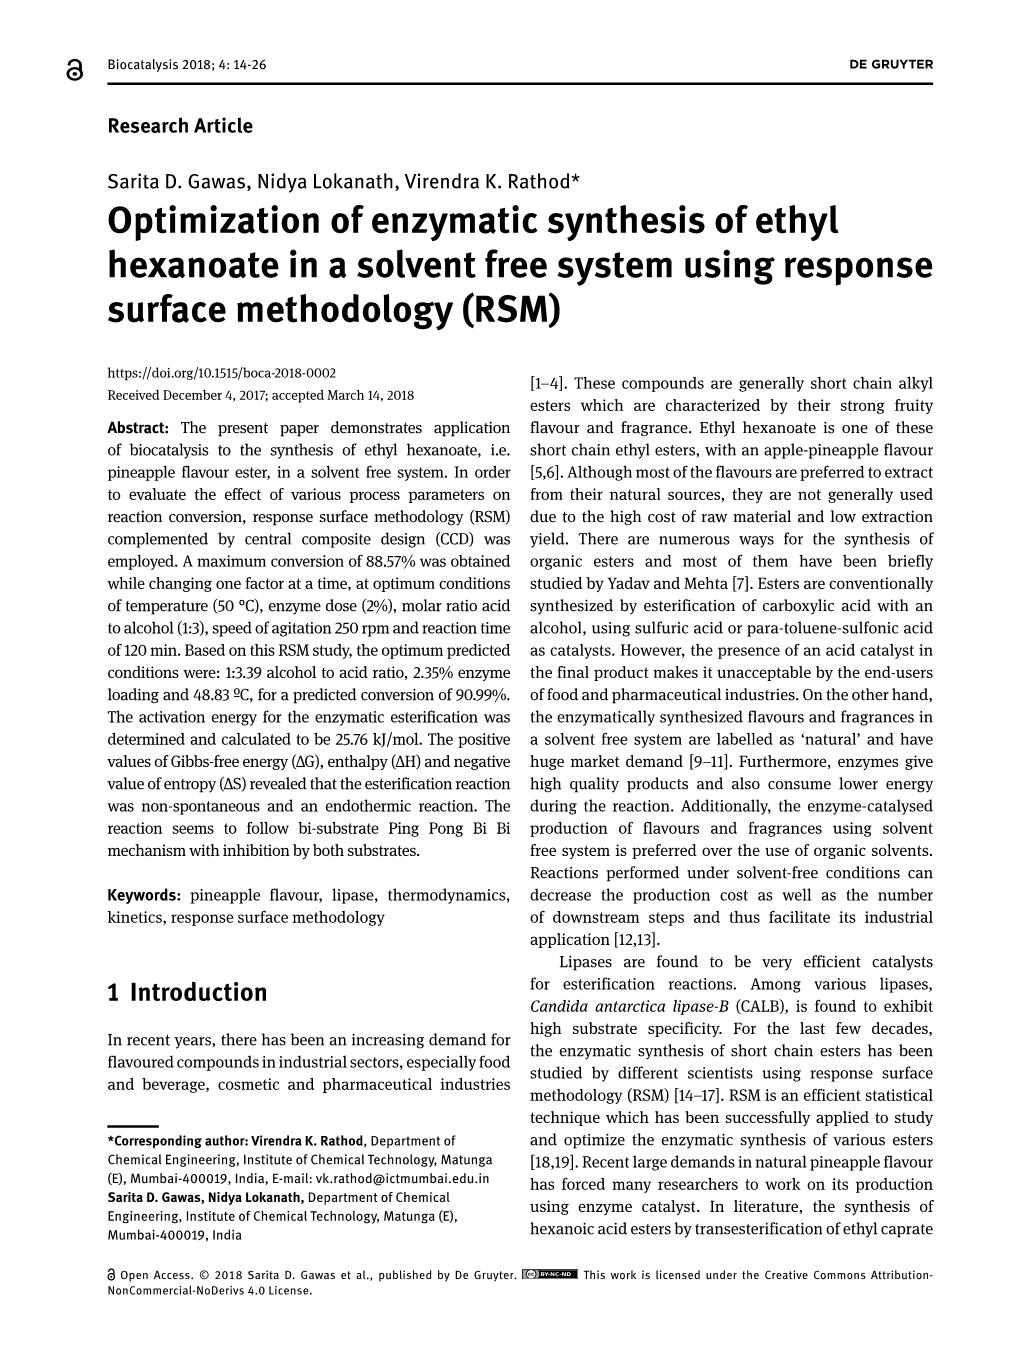 Optimization of Enzymatic Synthesis of Ethyl Hexanoate in a Solvent Free System Using Response Surface Methodology (RSM) [1–4]